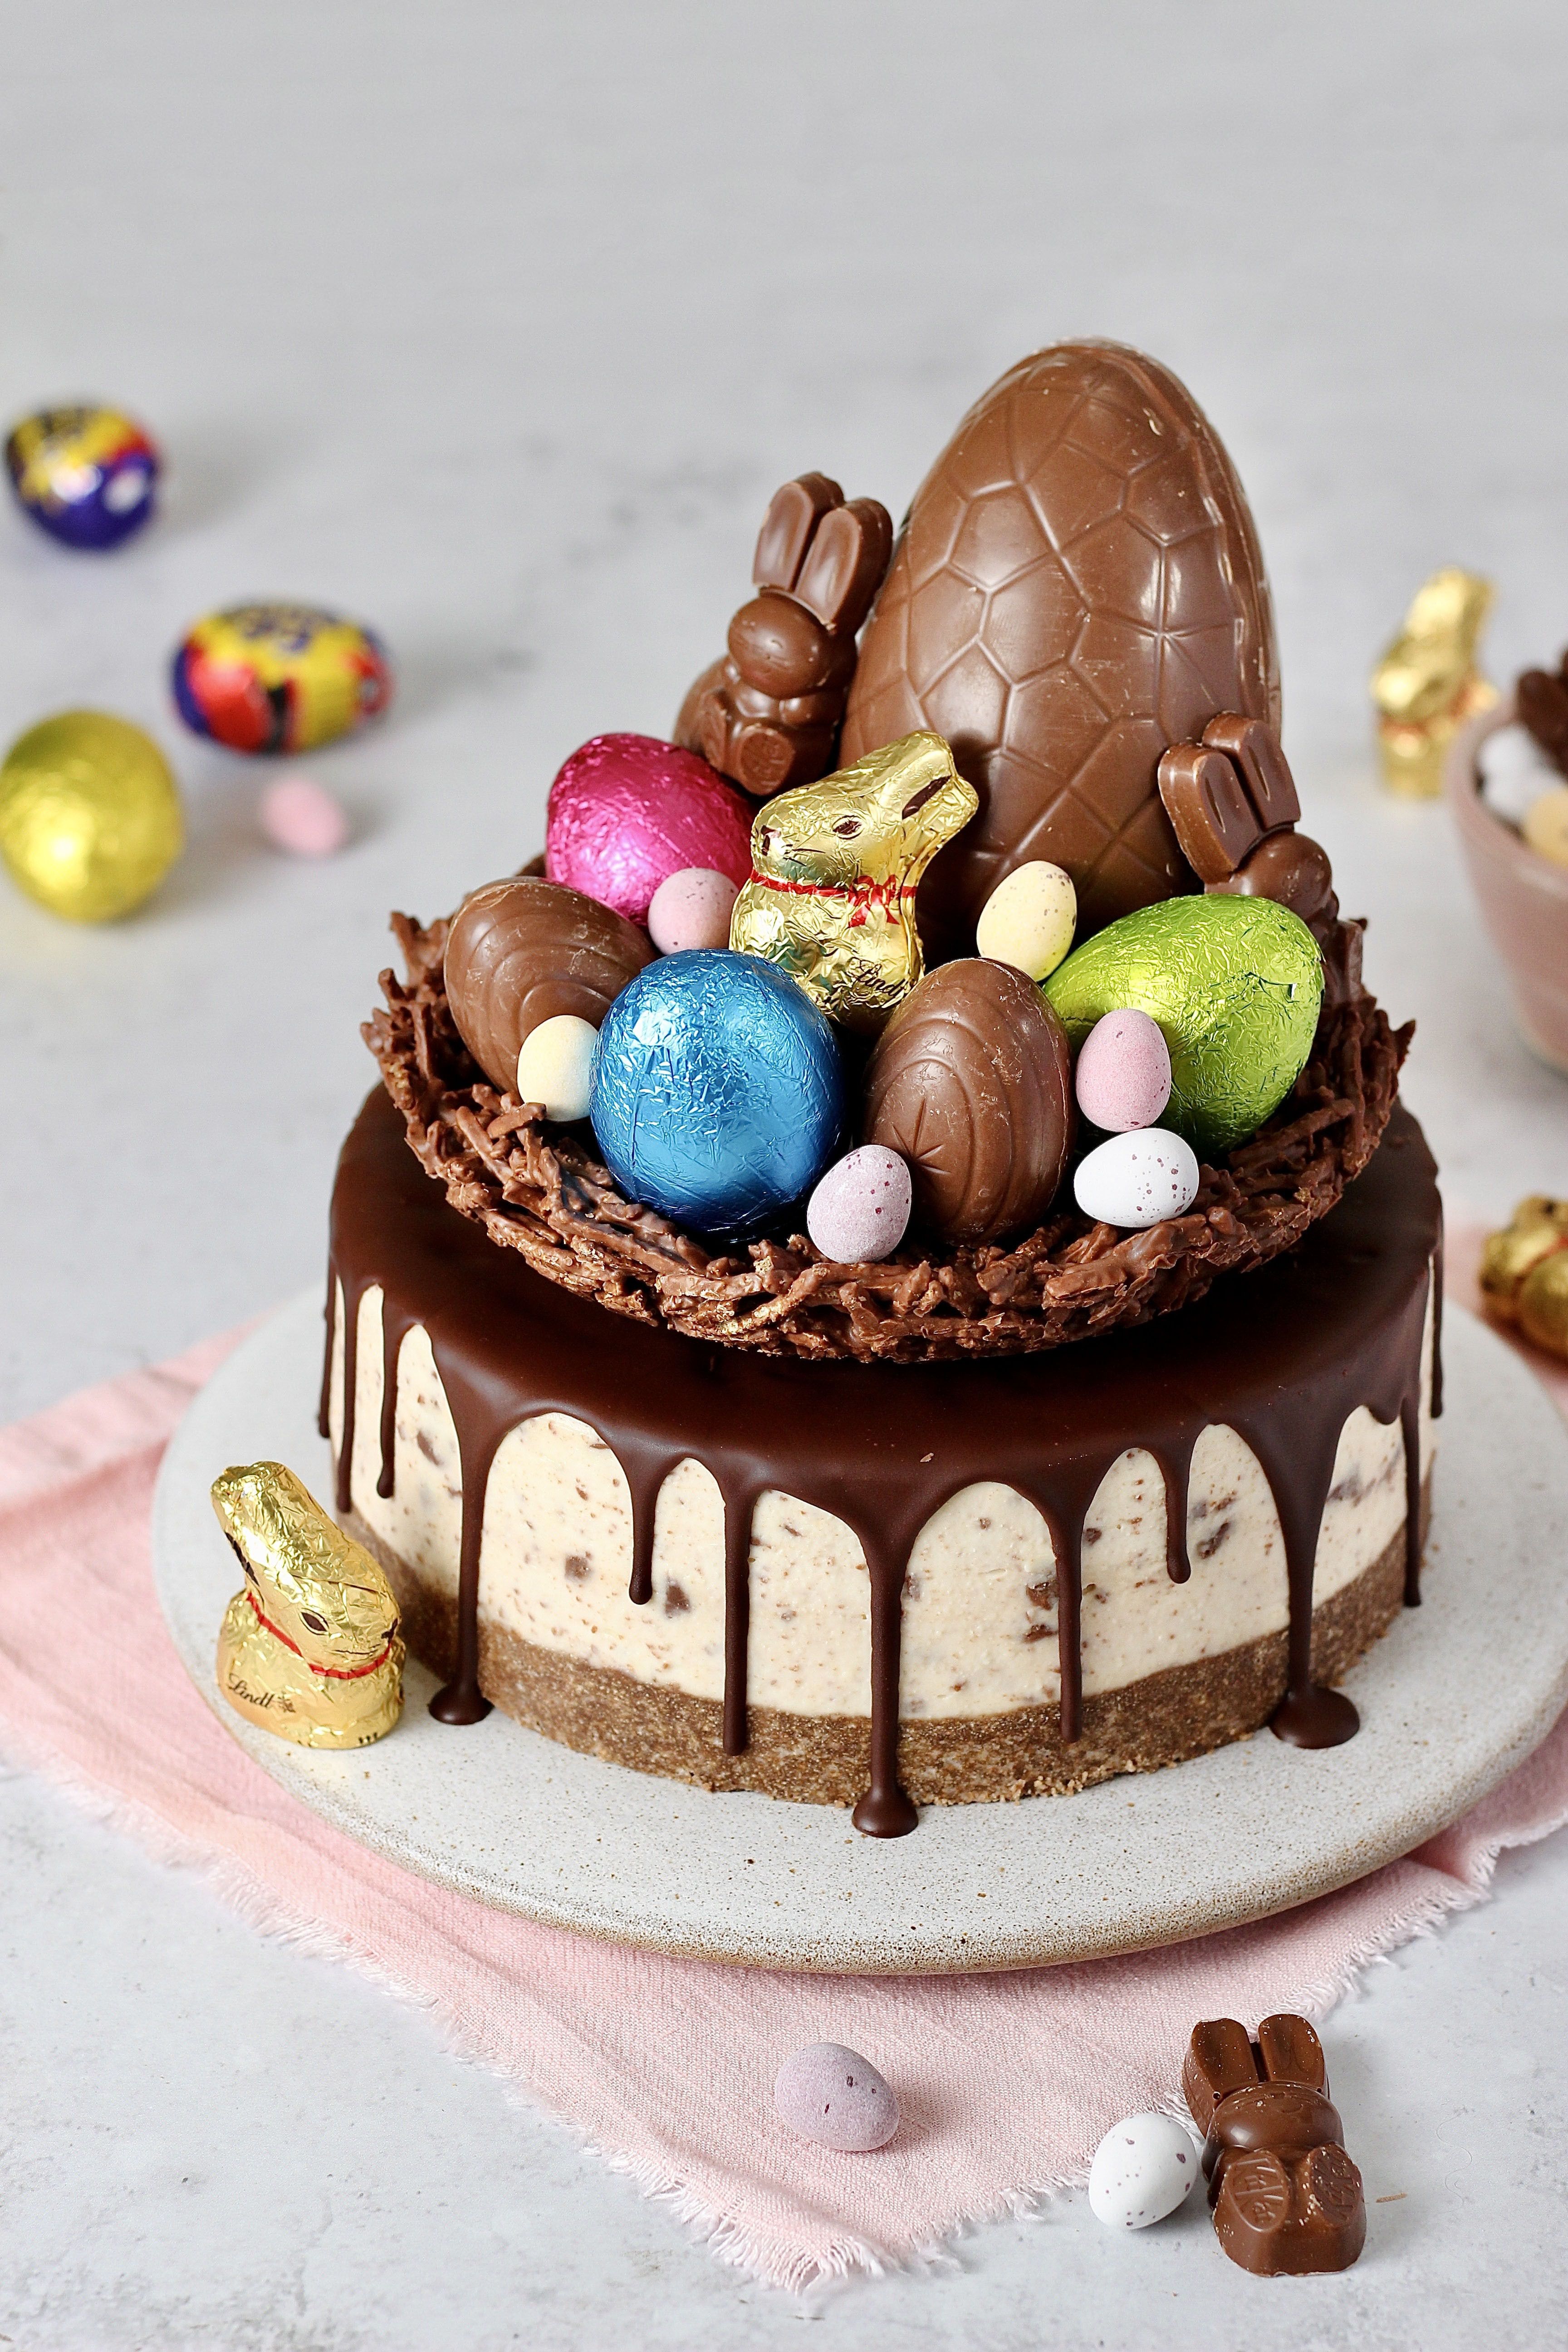 Nearly time for Chocolate – Easter Chocolate Cake Recipe! – Cookalicious